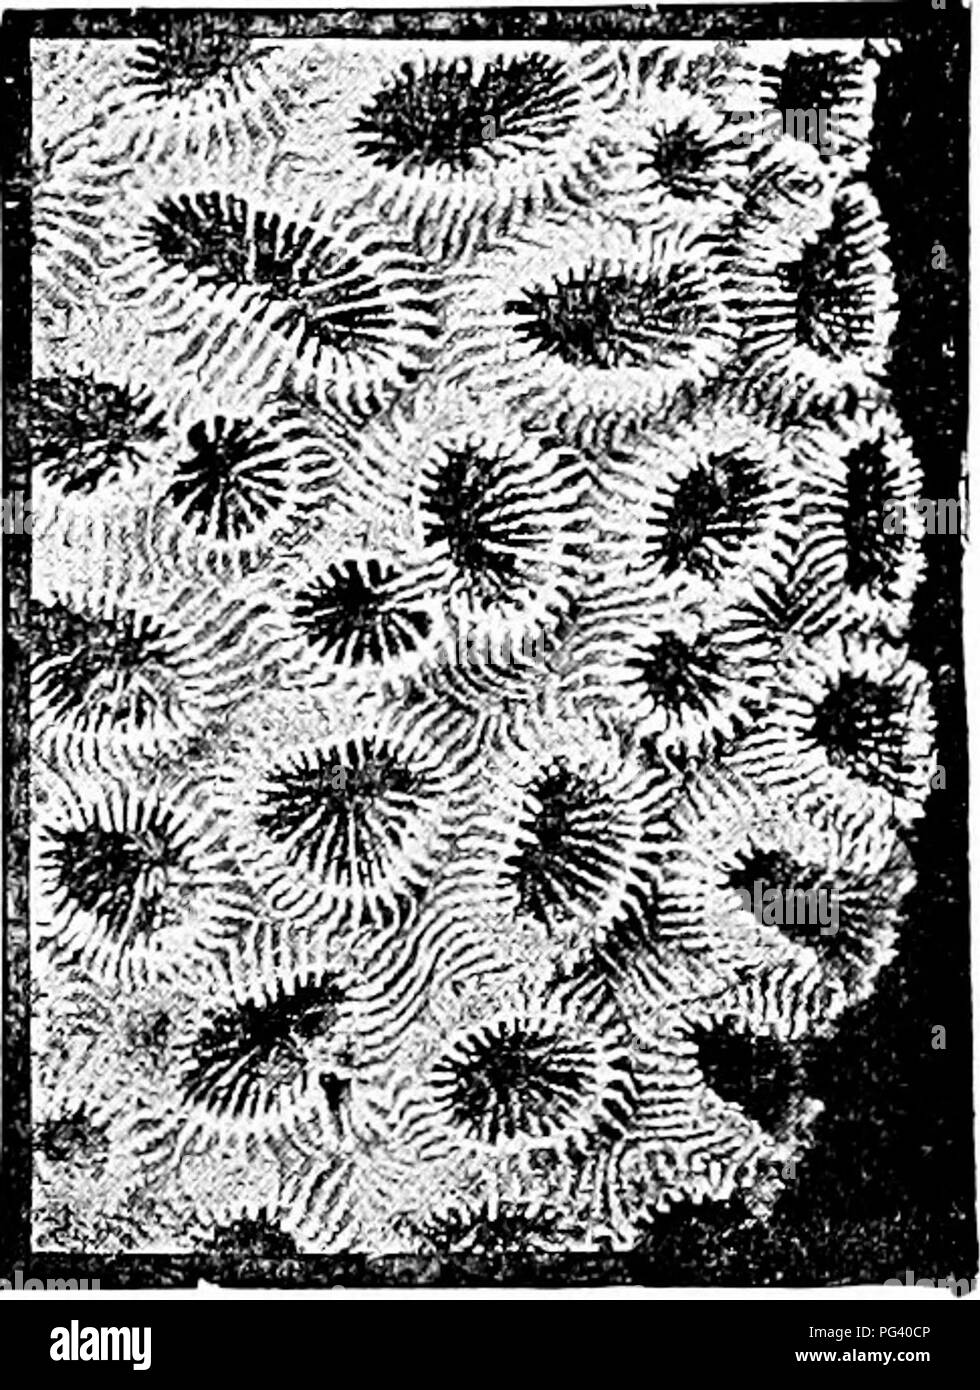 . A manual of zoology. Zoology. Fig. 203.—Astrangia dance*; five polyps in various stages of expansion. Fig. 204.—Cainria arabica (after Klunzinger). all seas from tide marks to the greatest depth. A few are free, but most are sessile. Metridium* Bunodes* Sagartia* Bicidium* (parasitic on Cyoiiea), Halcampa*. Zoanthe^e have two kinds of alternating mesenteries, individuals of the colonies usually incrusted with foreign matter. EpiztaHthus''' lives symbi- otically with hermit crabs (fig. 114). Sub Order II. ANTIPATHARIA. Six pairs of septa and six (Antipathcs) or twenty- four (Gerardia) simple  Stock Photo